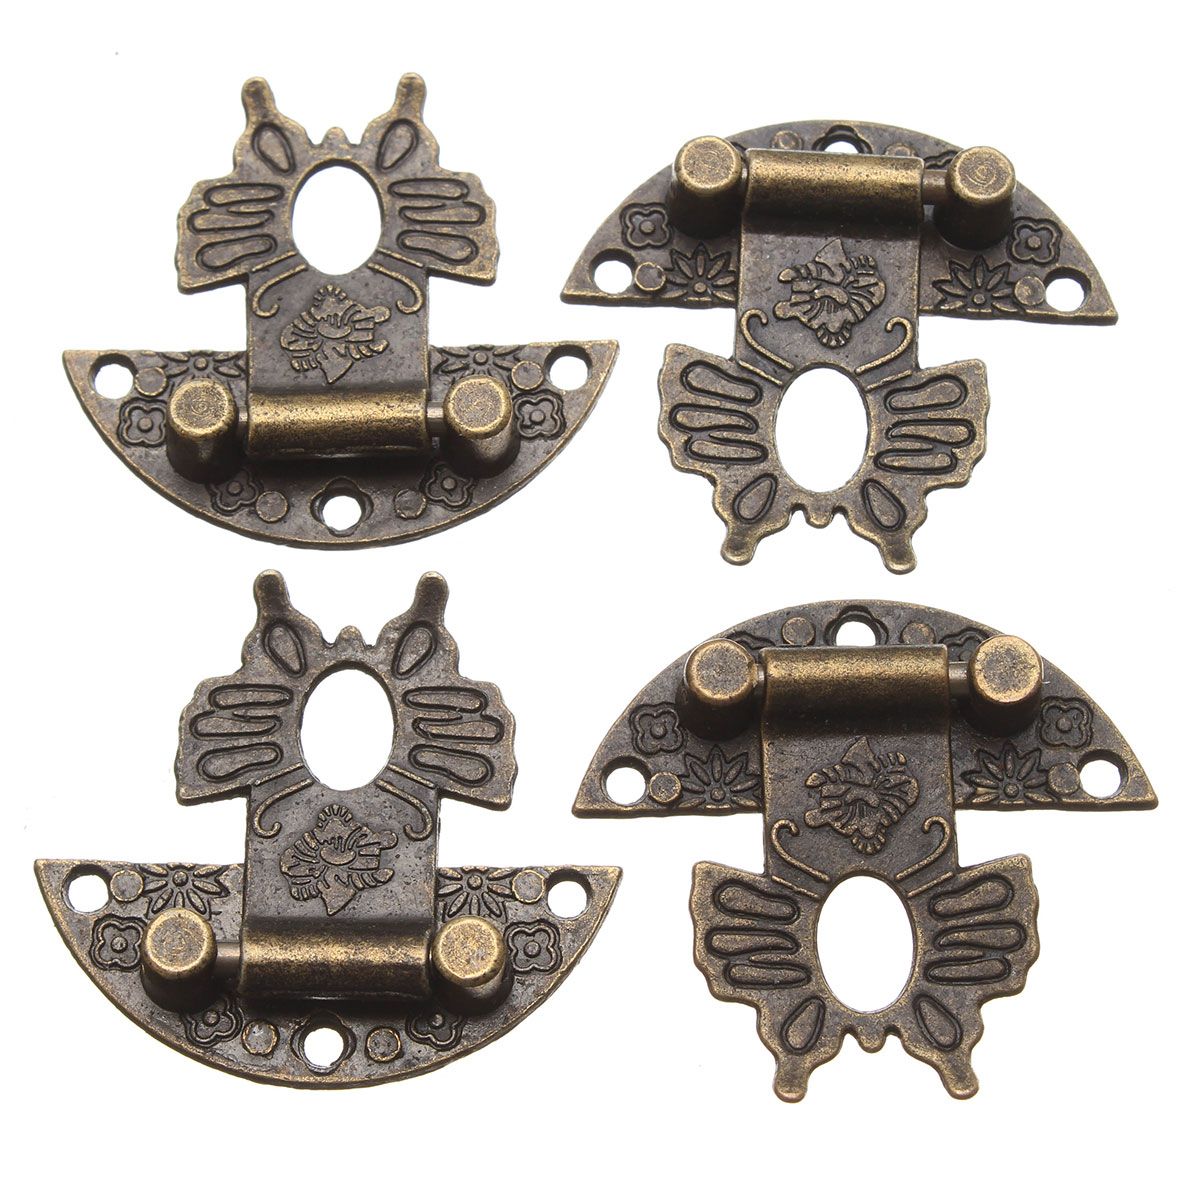 Jewelry-Wooden-Box-Lock-Buckle-Decorative-Hardware-Butterfly-Clasp-Antique-Bronze-1427531